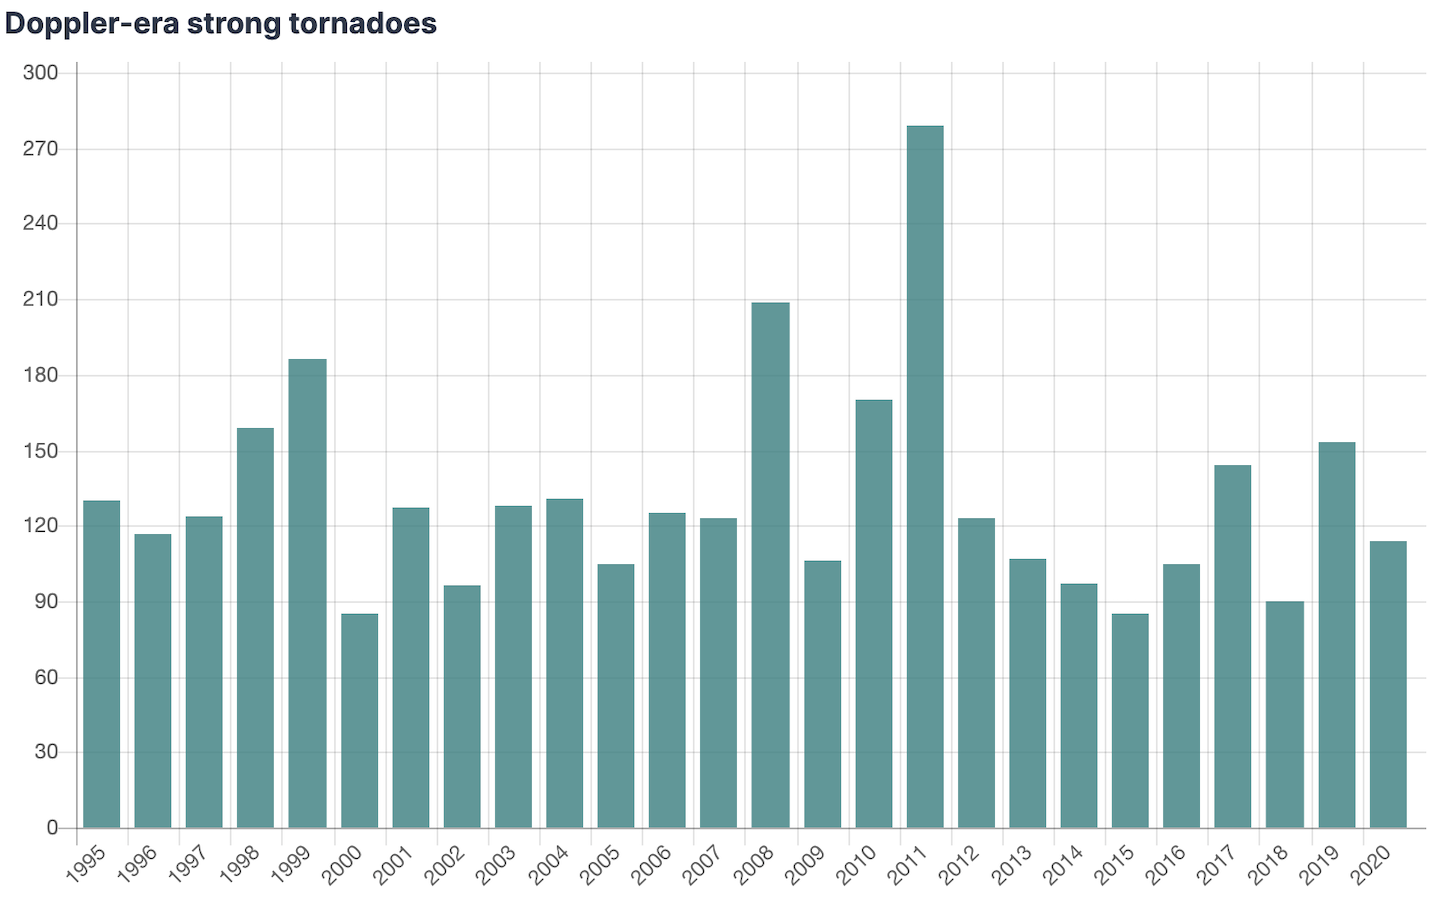 Trends of strong tornadoes